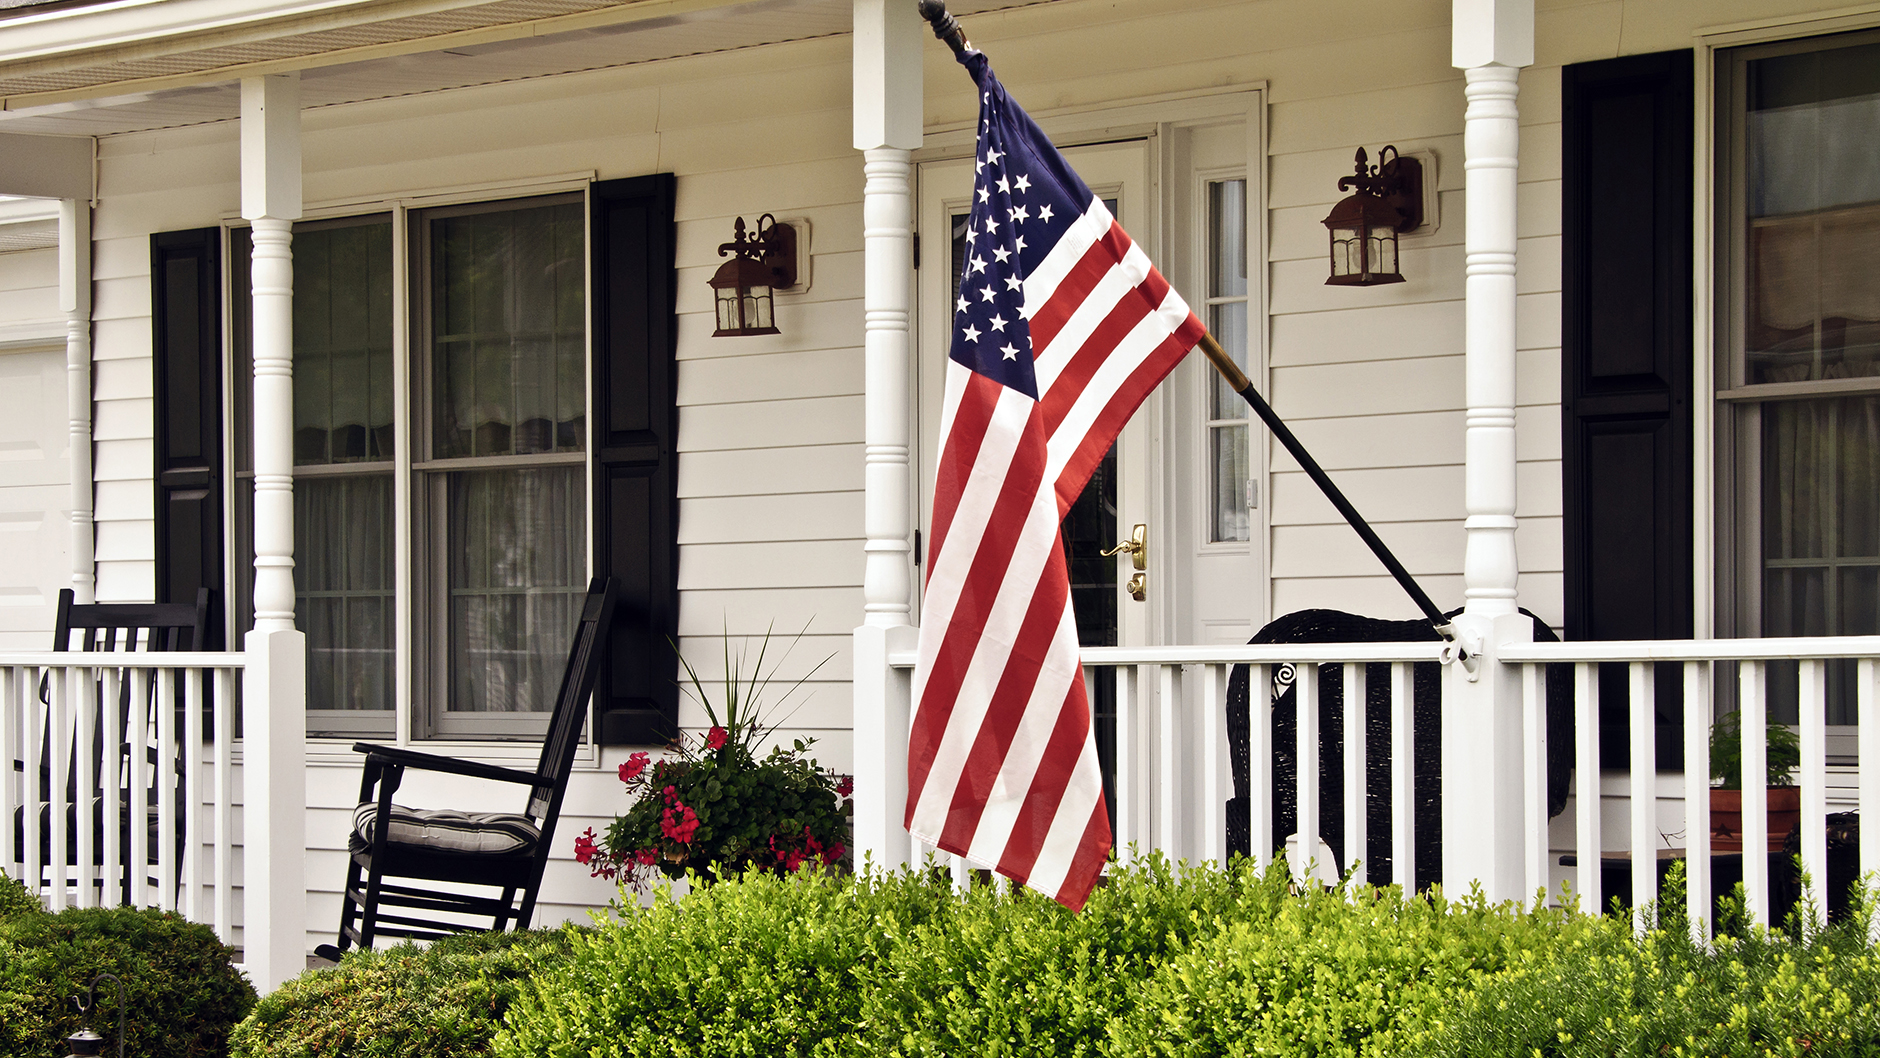 American flag hanging in front of white house with wide front porch decorated with flowers and rocking chairs